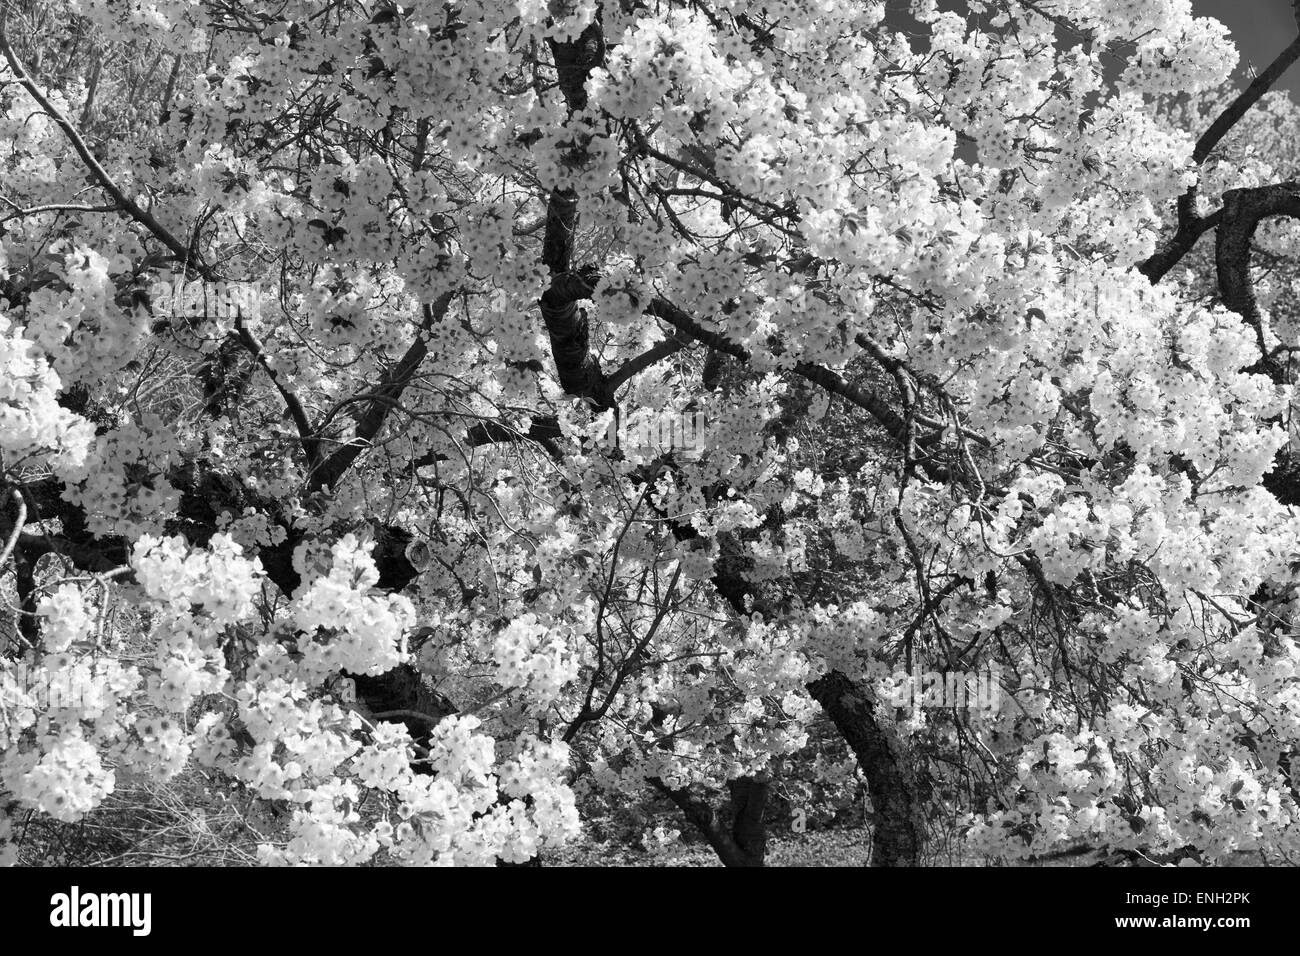 Spring: cherry trees are blooming Stock Photo